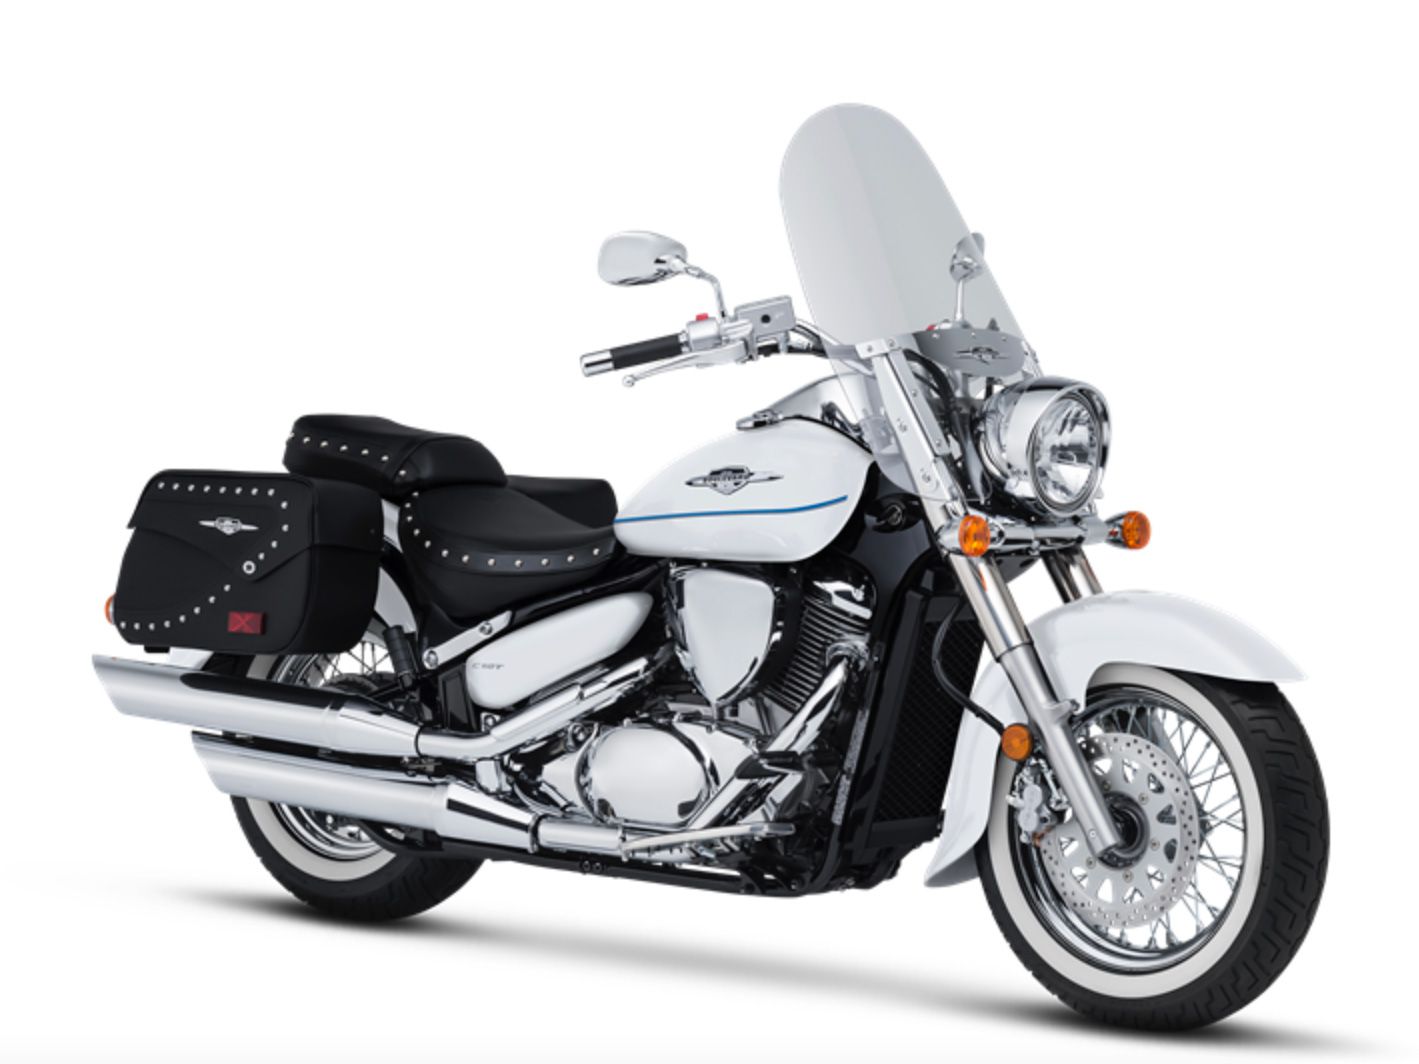 The underwhelming yet highly affordable Suzuki Boulevard C50T, at just $10,059 MSRP.